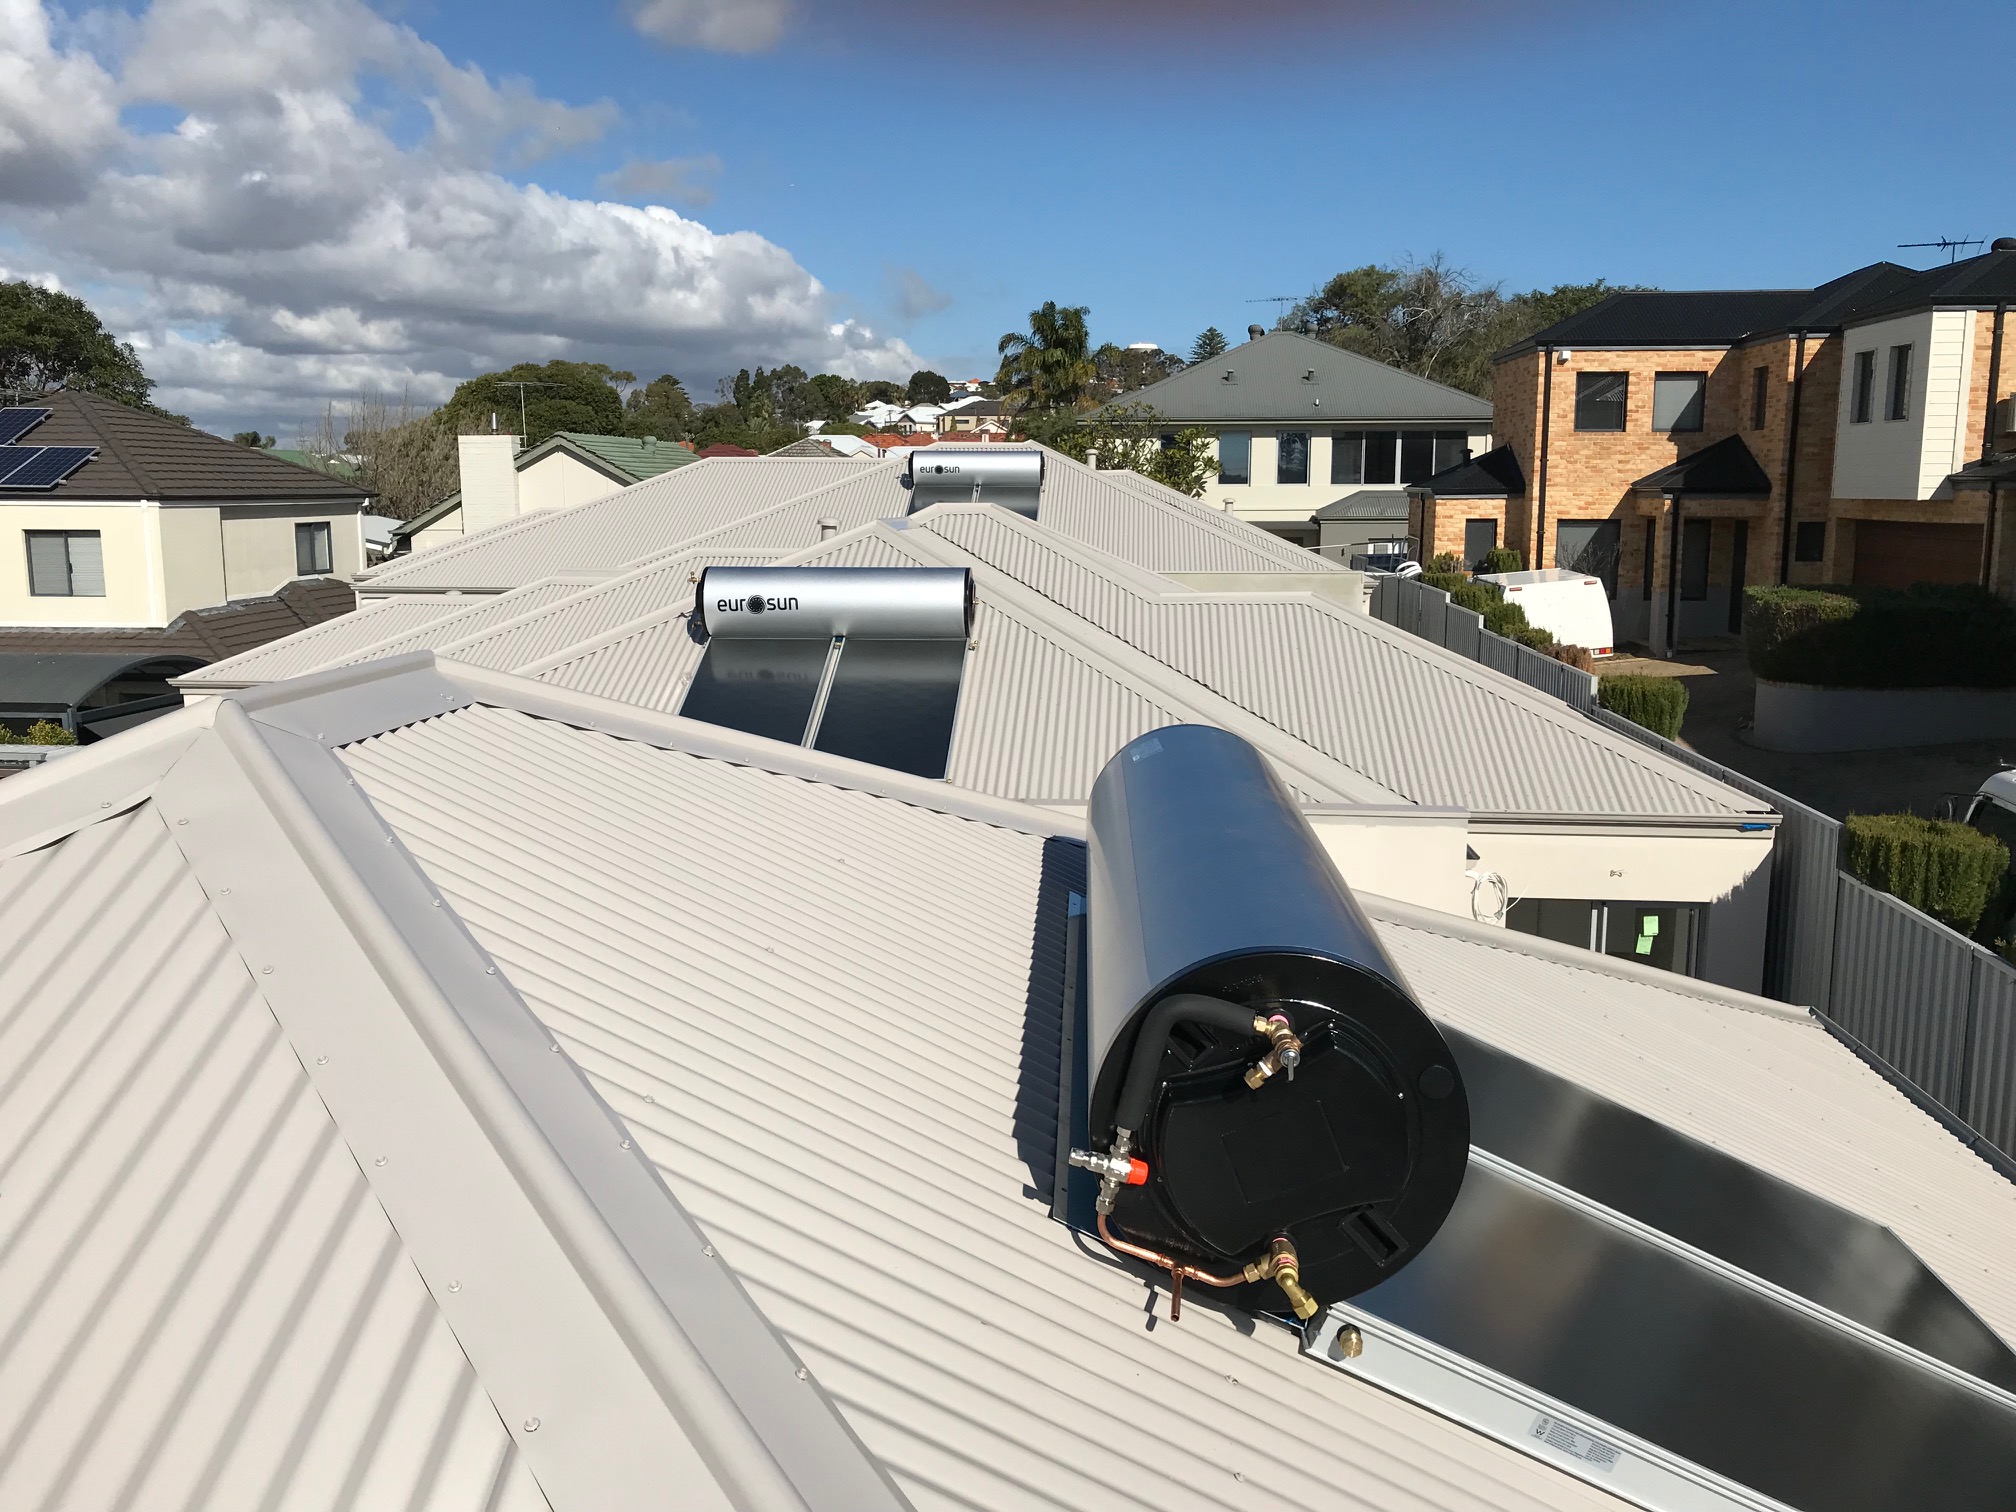 Eurosun Solar Panels installed on roofs in Perth